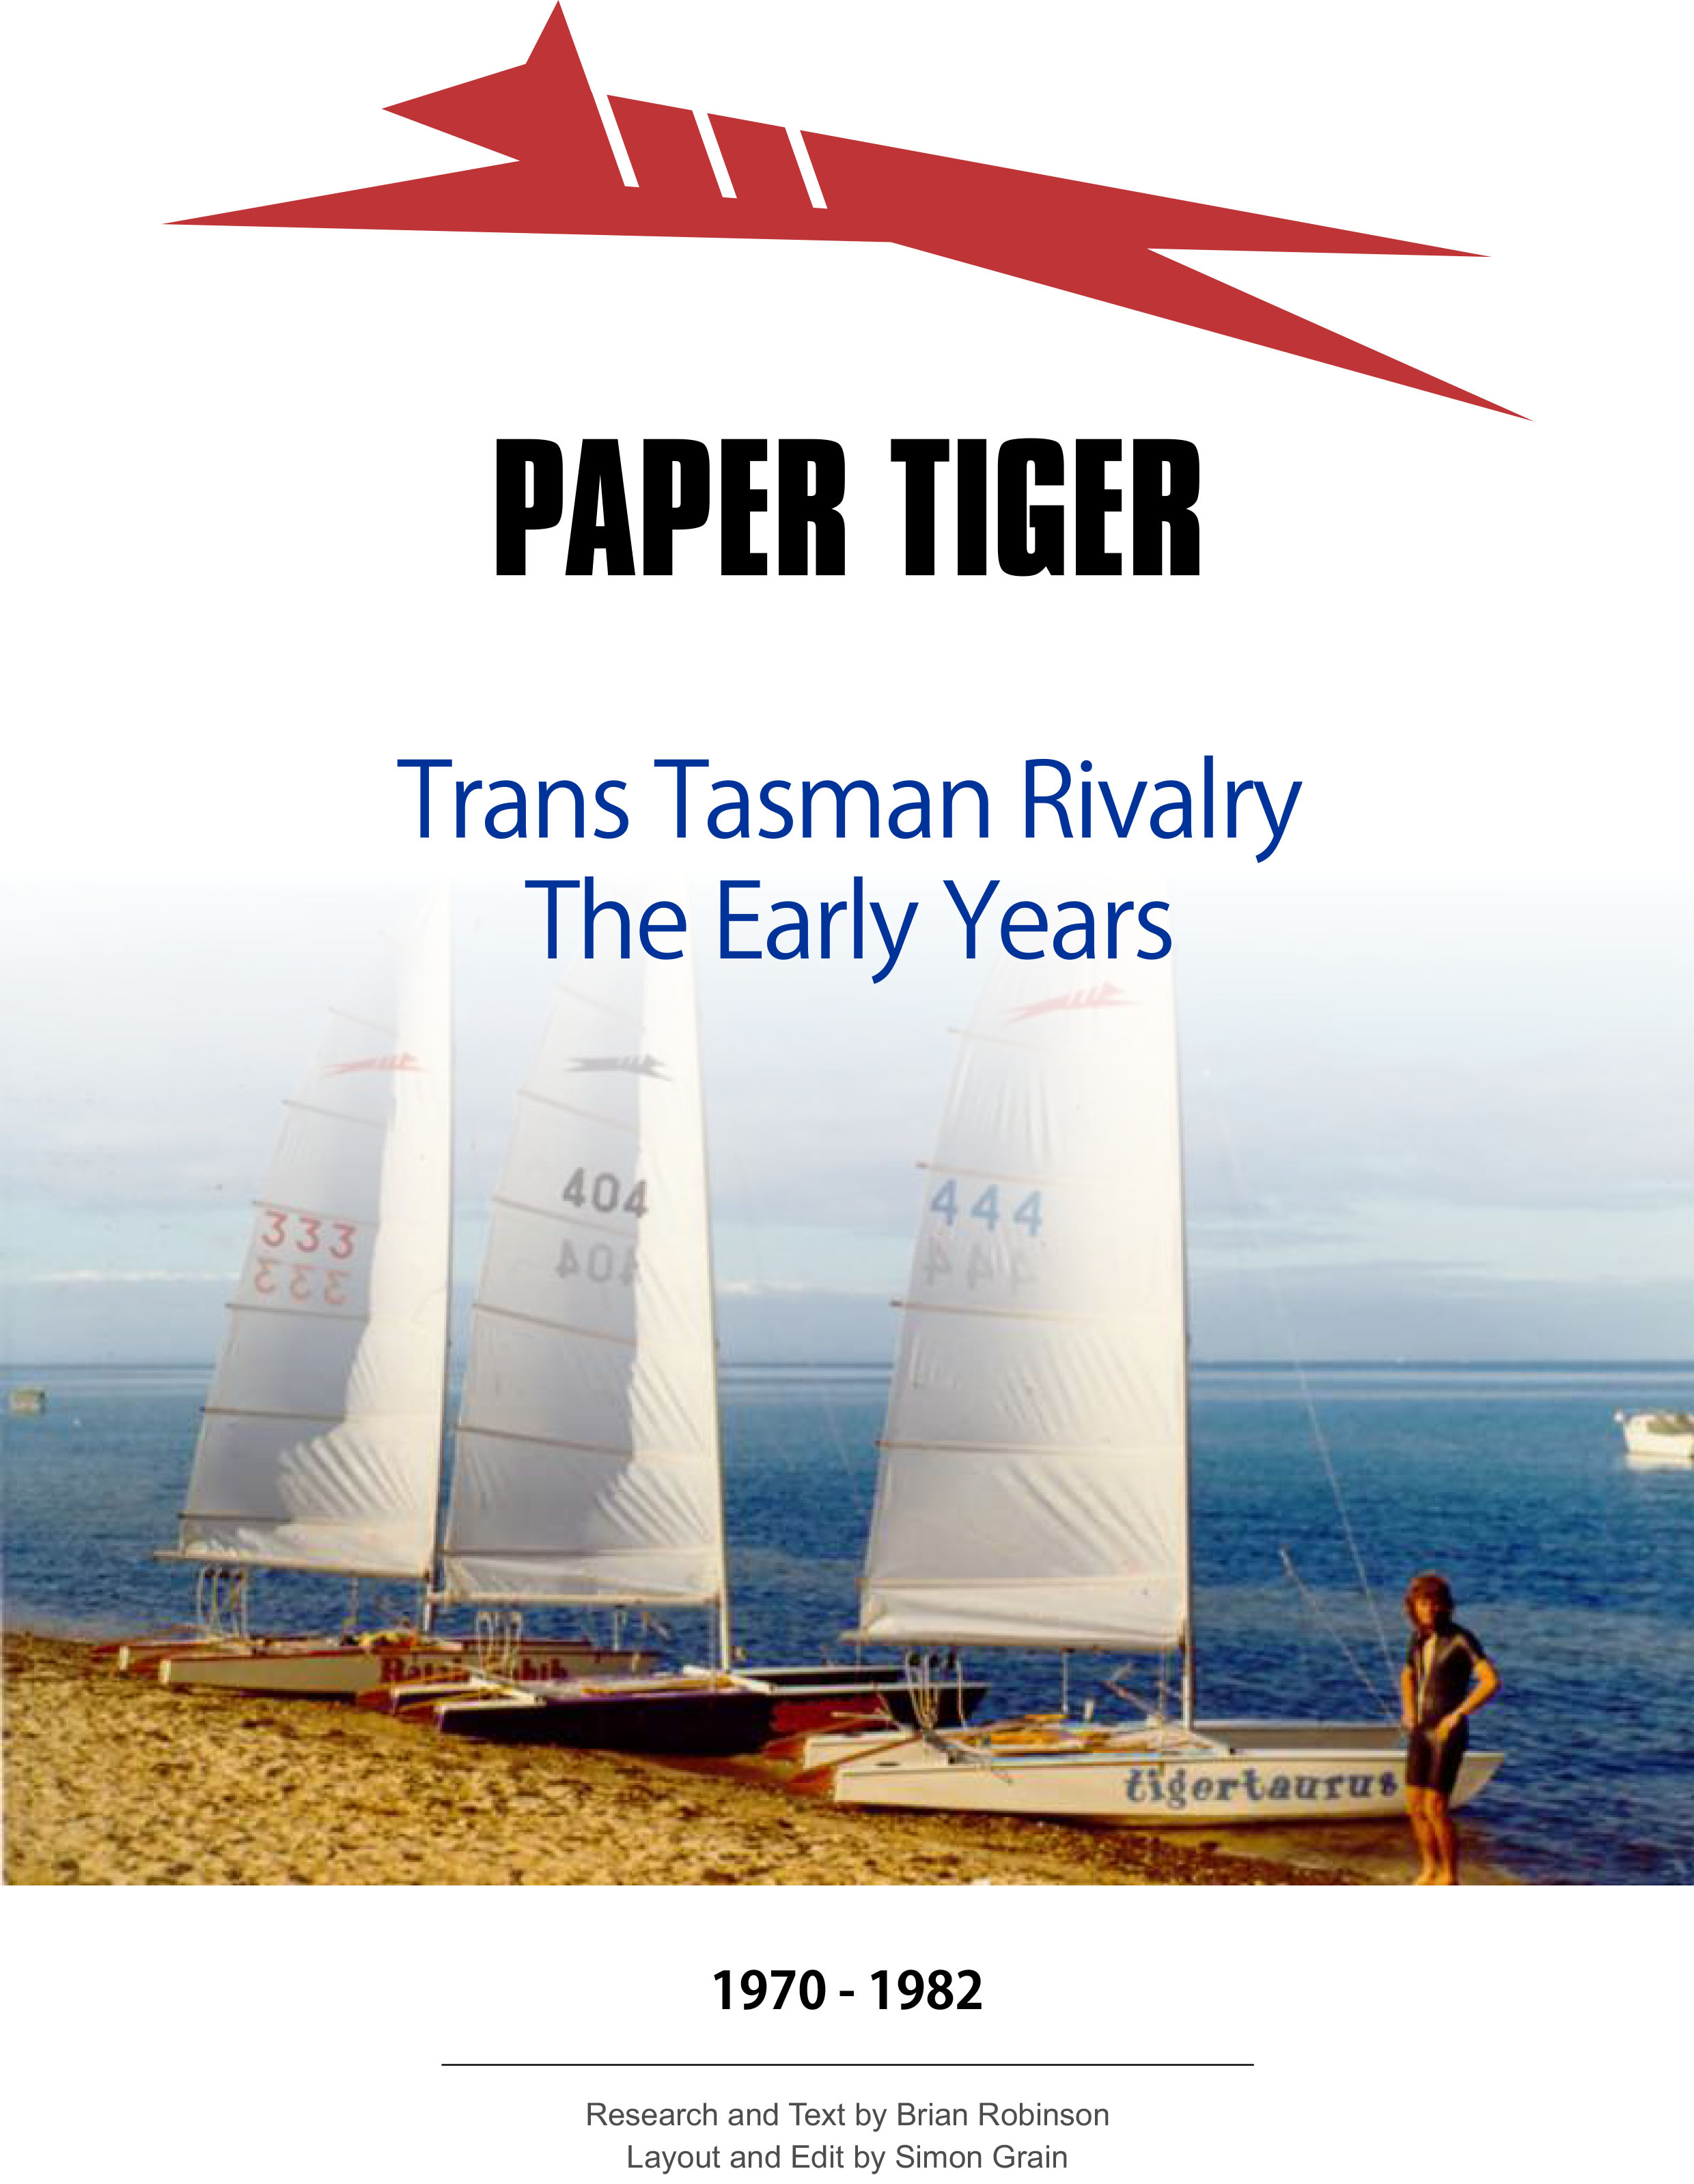 Paper Tiger Trans Tasman Rivalry The Early Years Edition 2.3 1